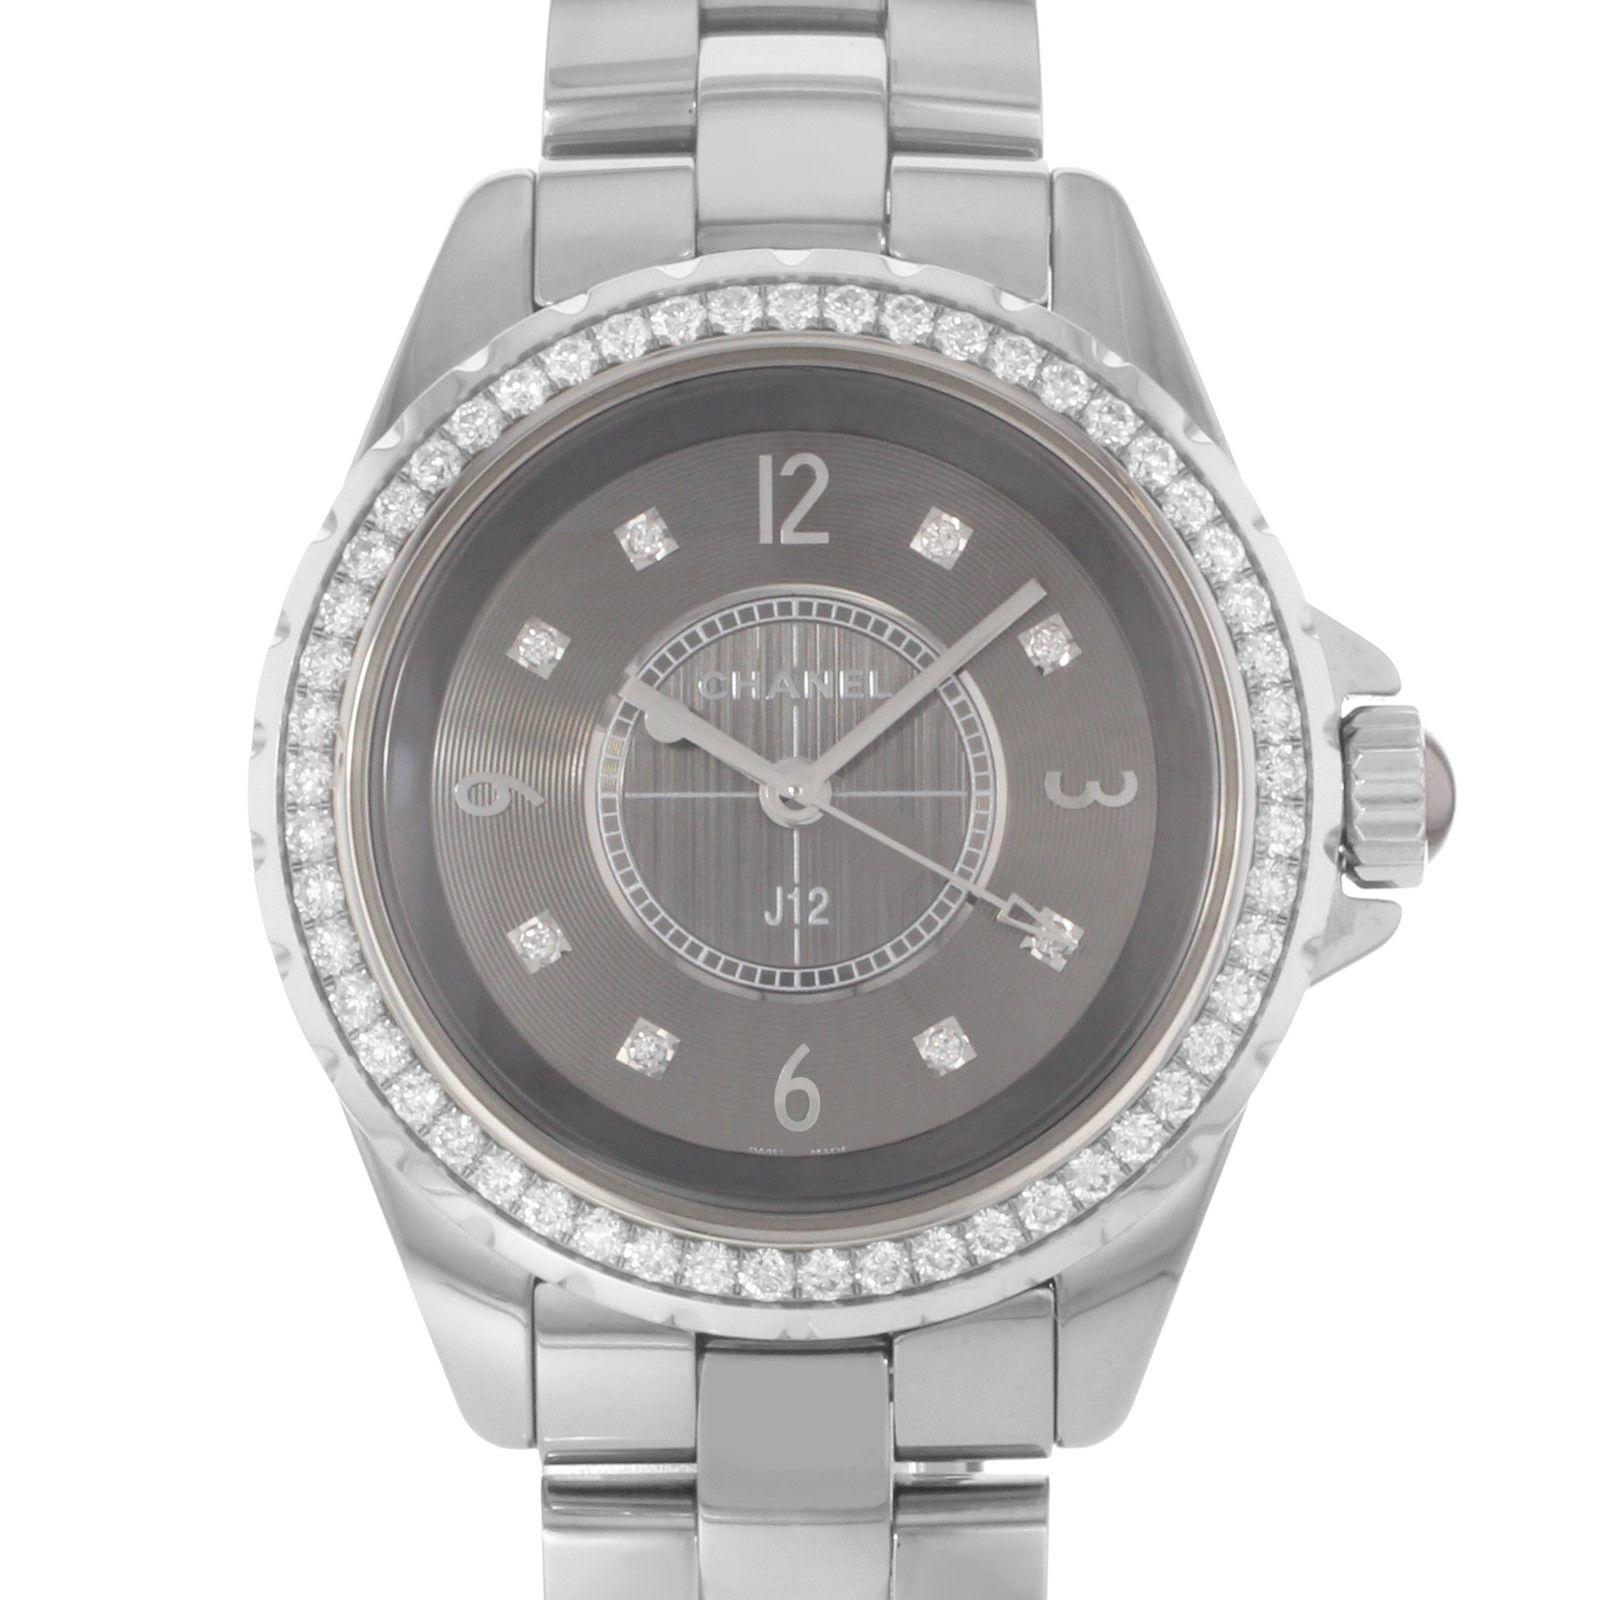 Display Model Chanel Titanium Ceramic and Diamonds Gray Dial Quartz Ladies Watch. No Original Box and Papers are Included. Comes With Chronostore Presentation Box and Chronostore Authnitciy Card . Covered by 3-year Chronostore Warranty.